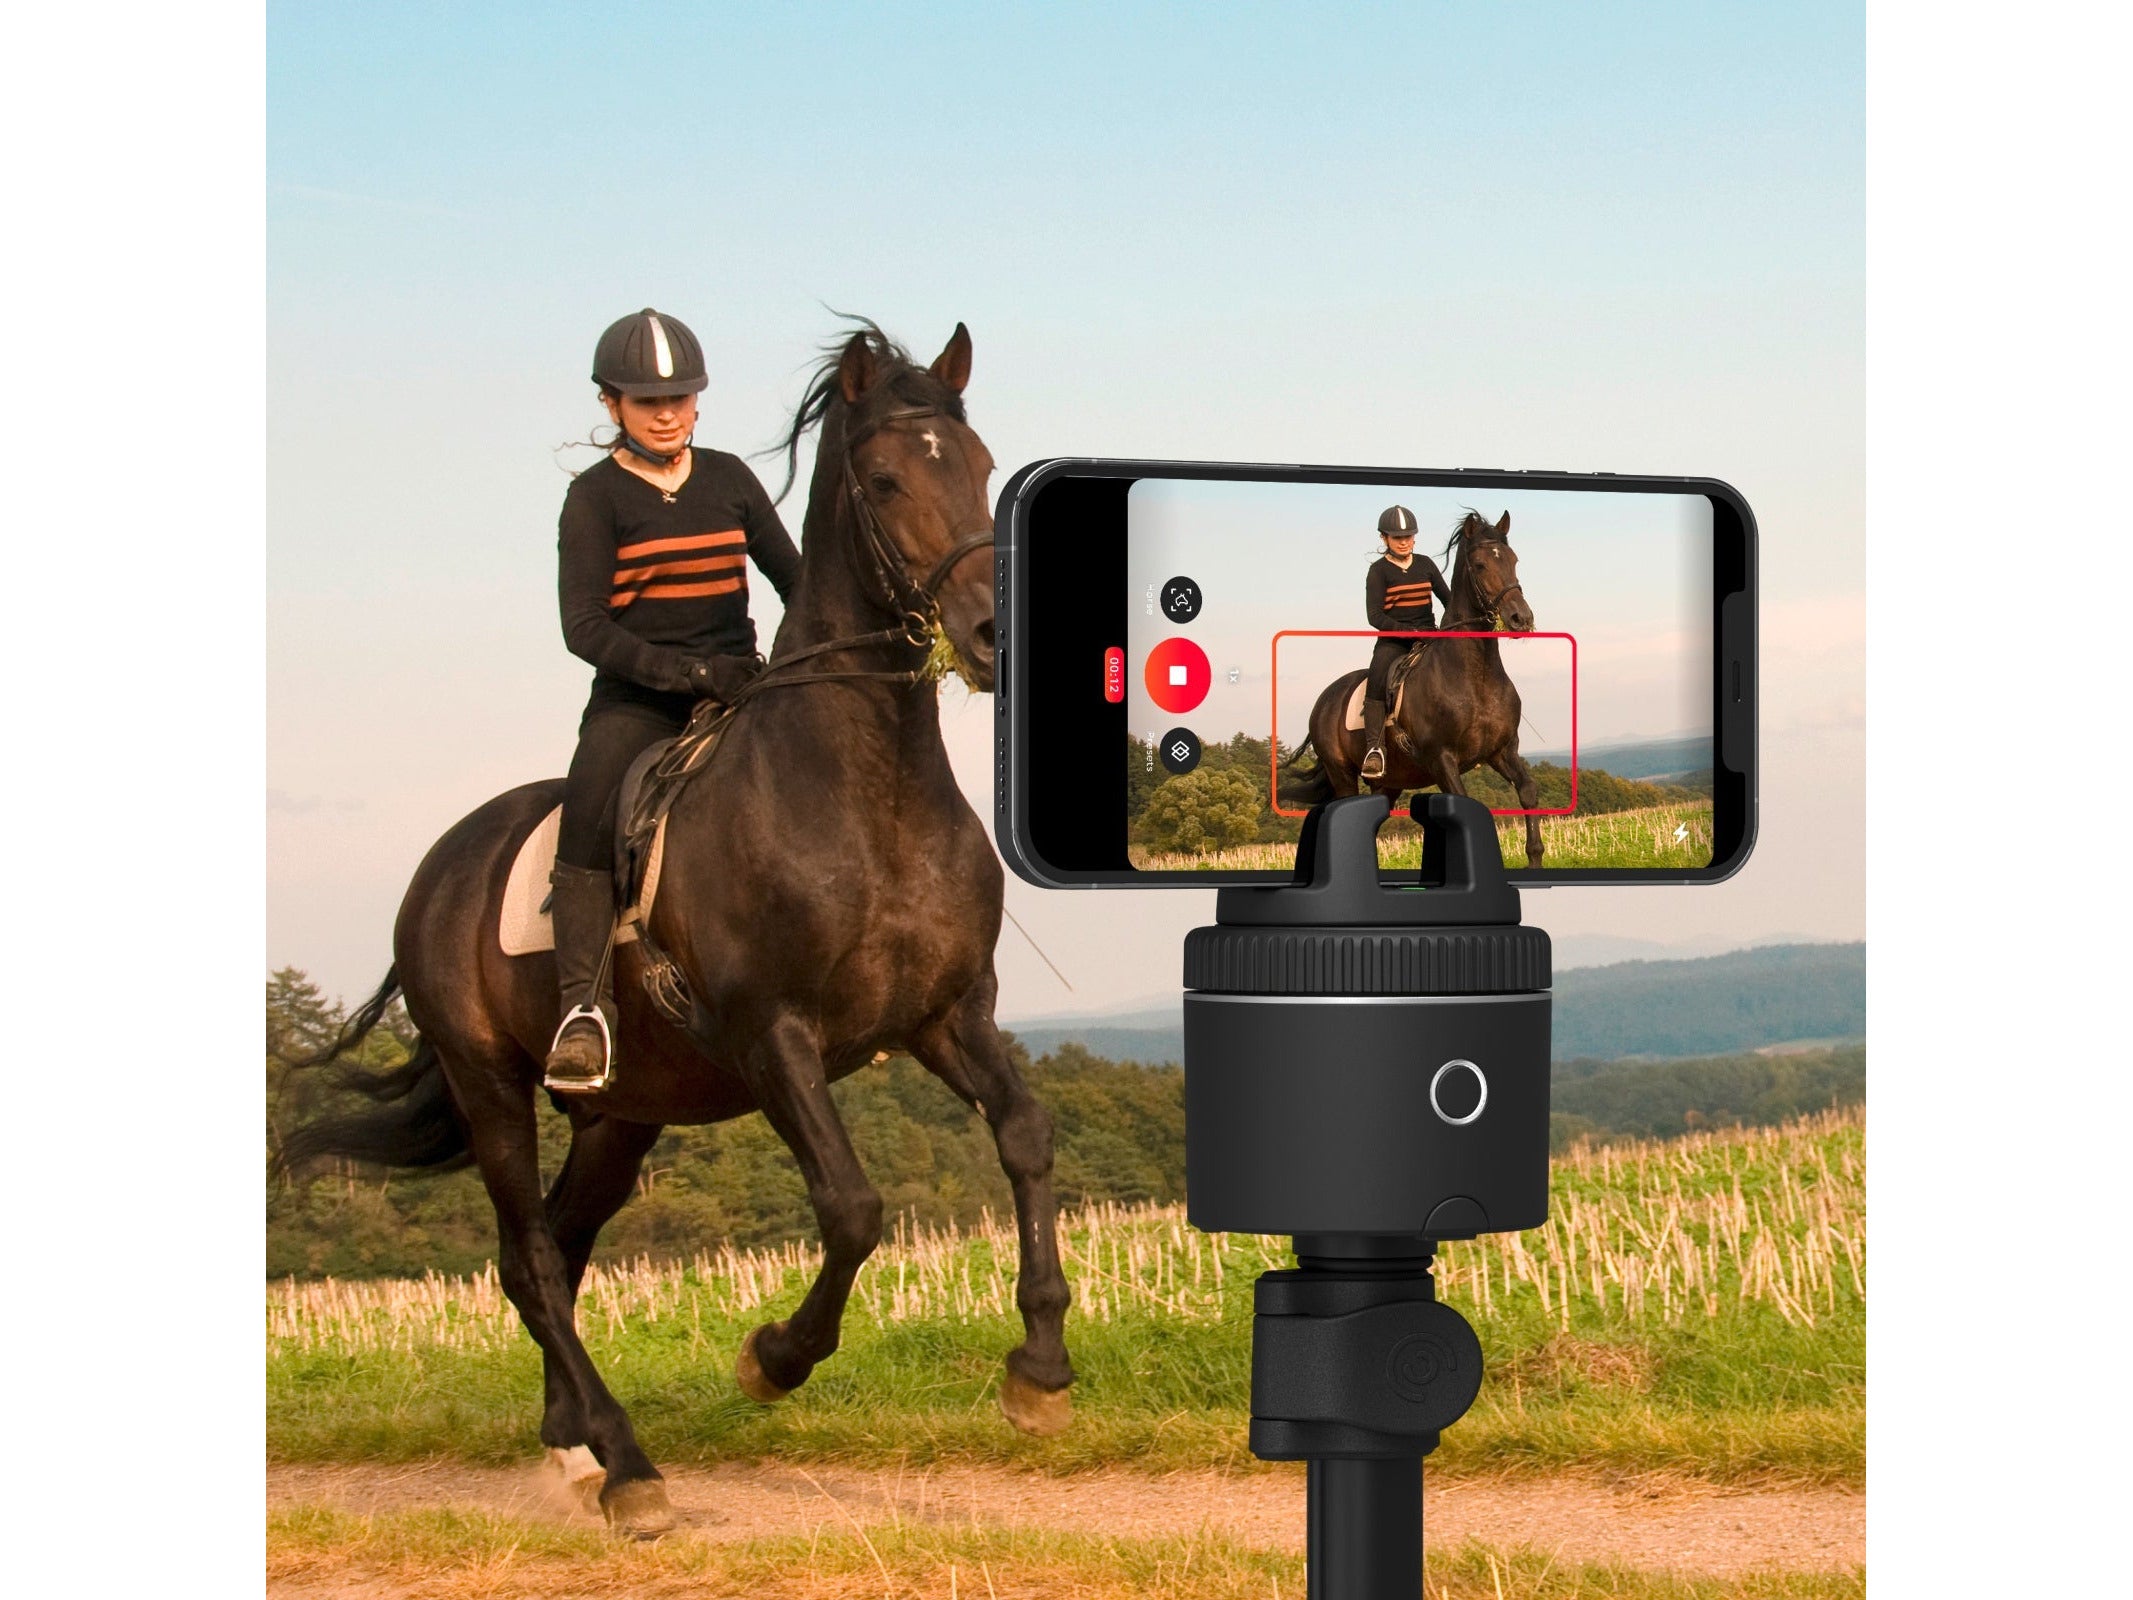 Pivo Standard Pack smartphone holder - automatic 360° recording while riding